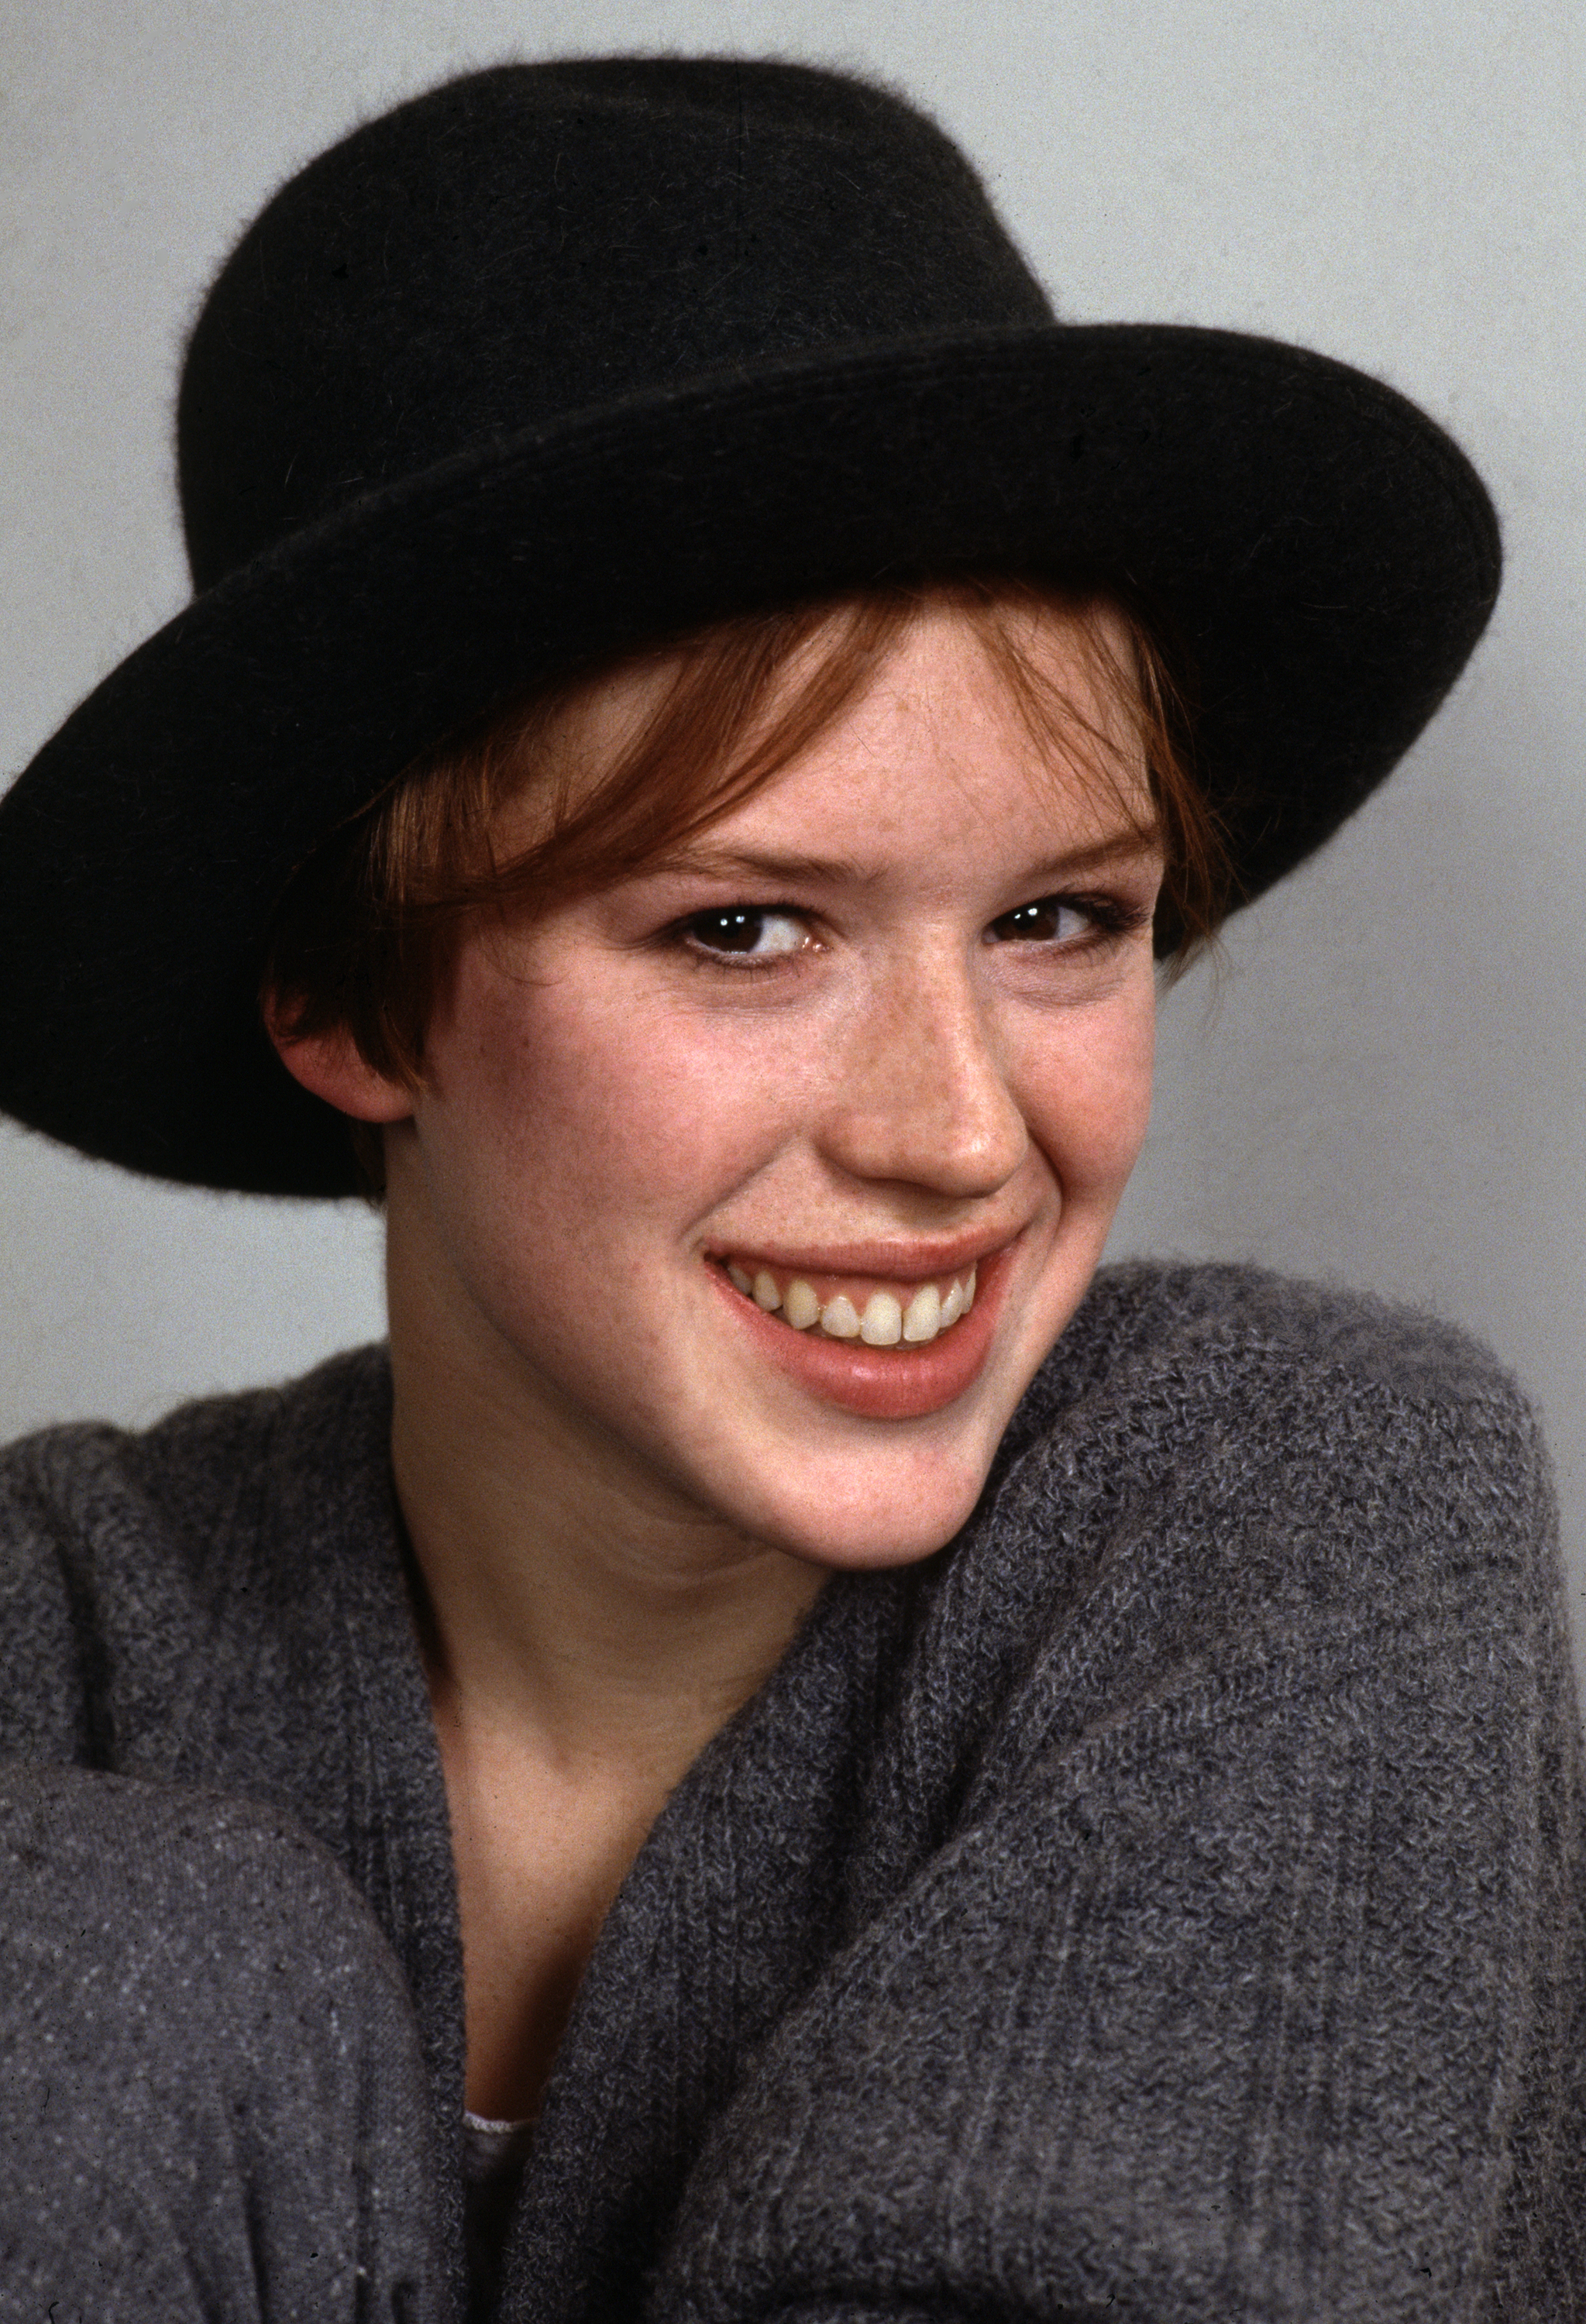 Molly Ringwald posing during a portrait session, on January 30, 1985, in Los Angeles, California | Source: Getty Images